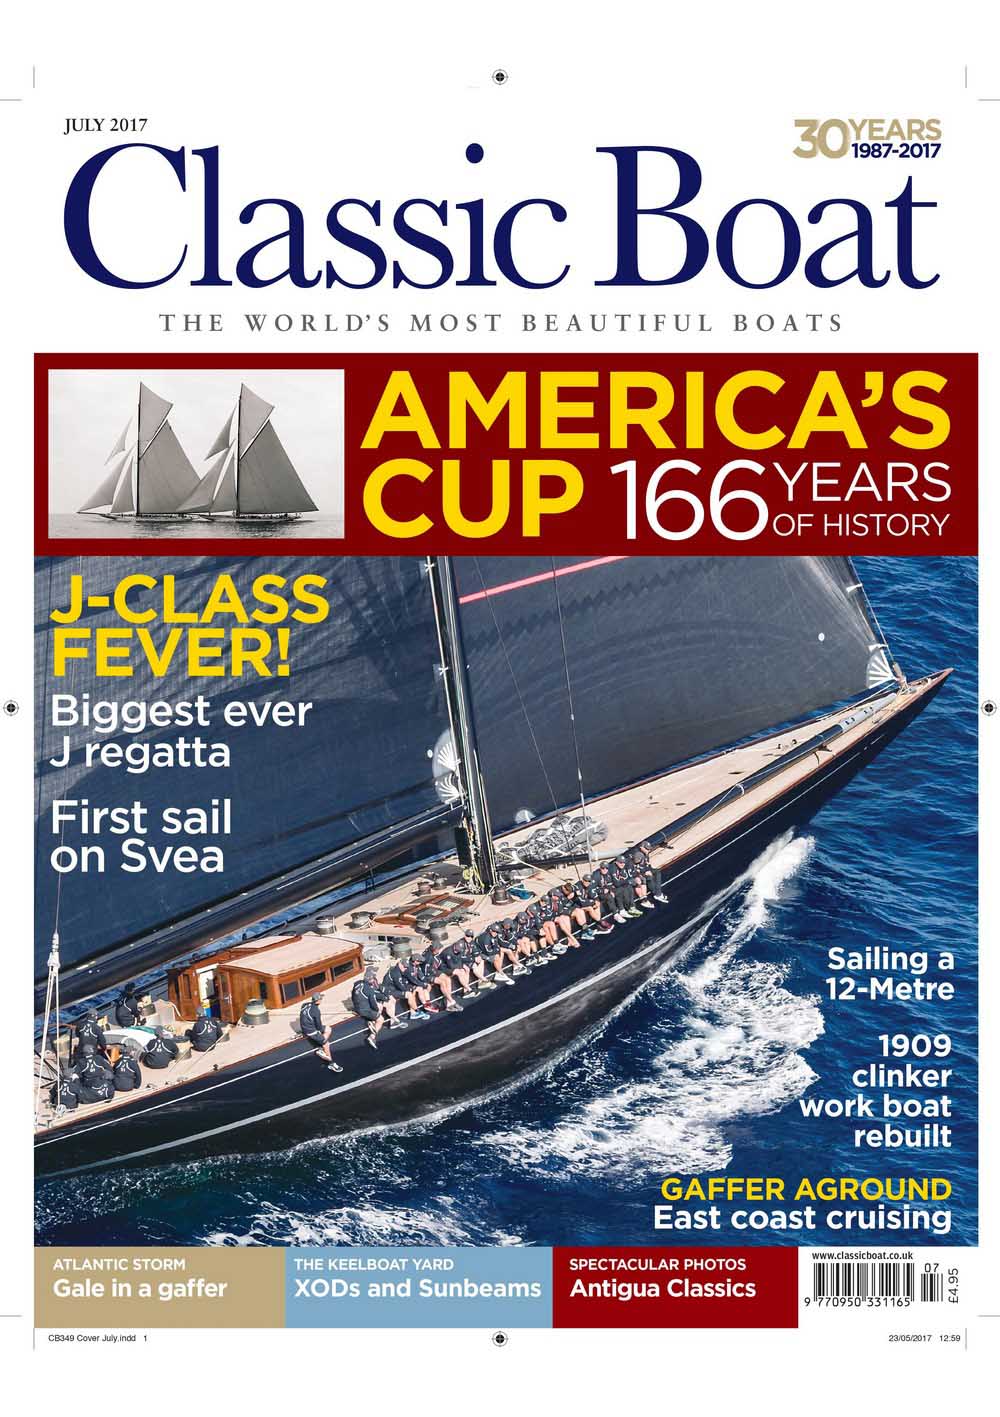 Interview "Classic Boat"